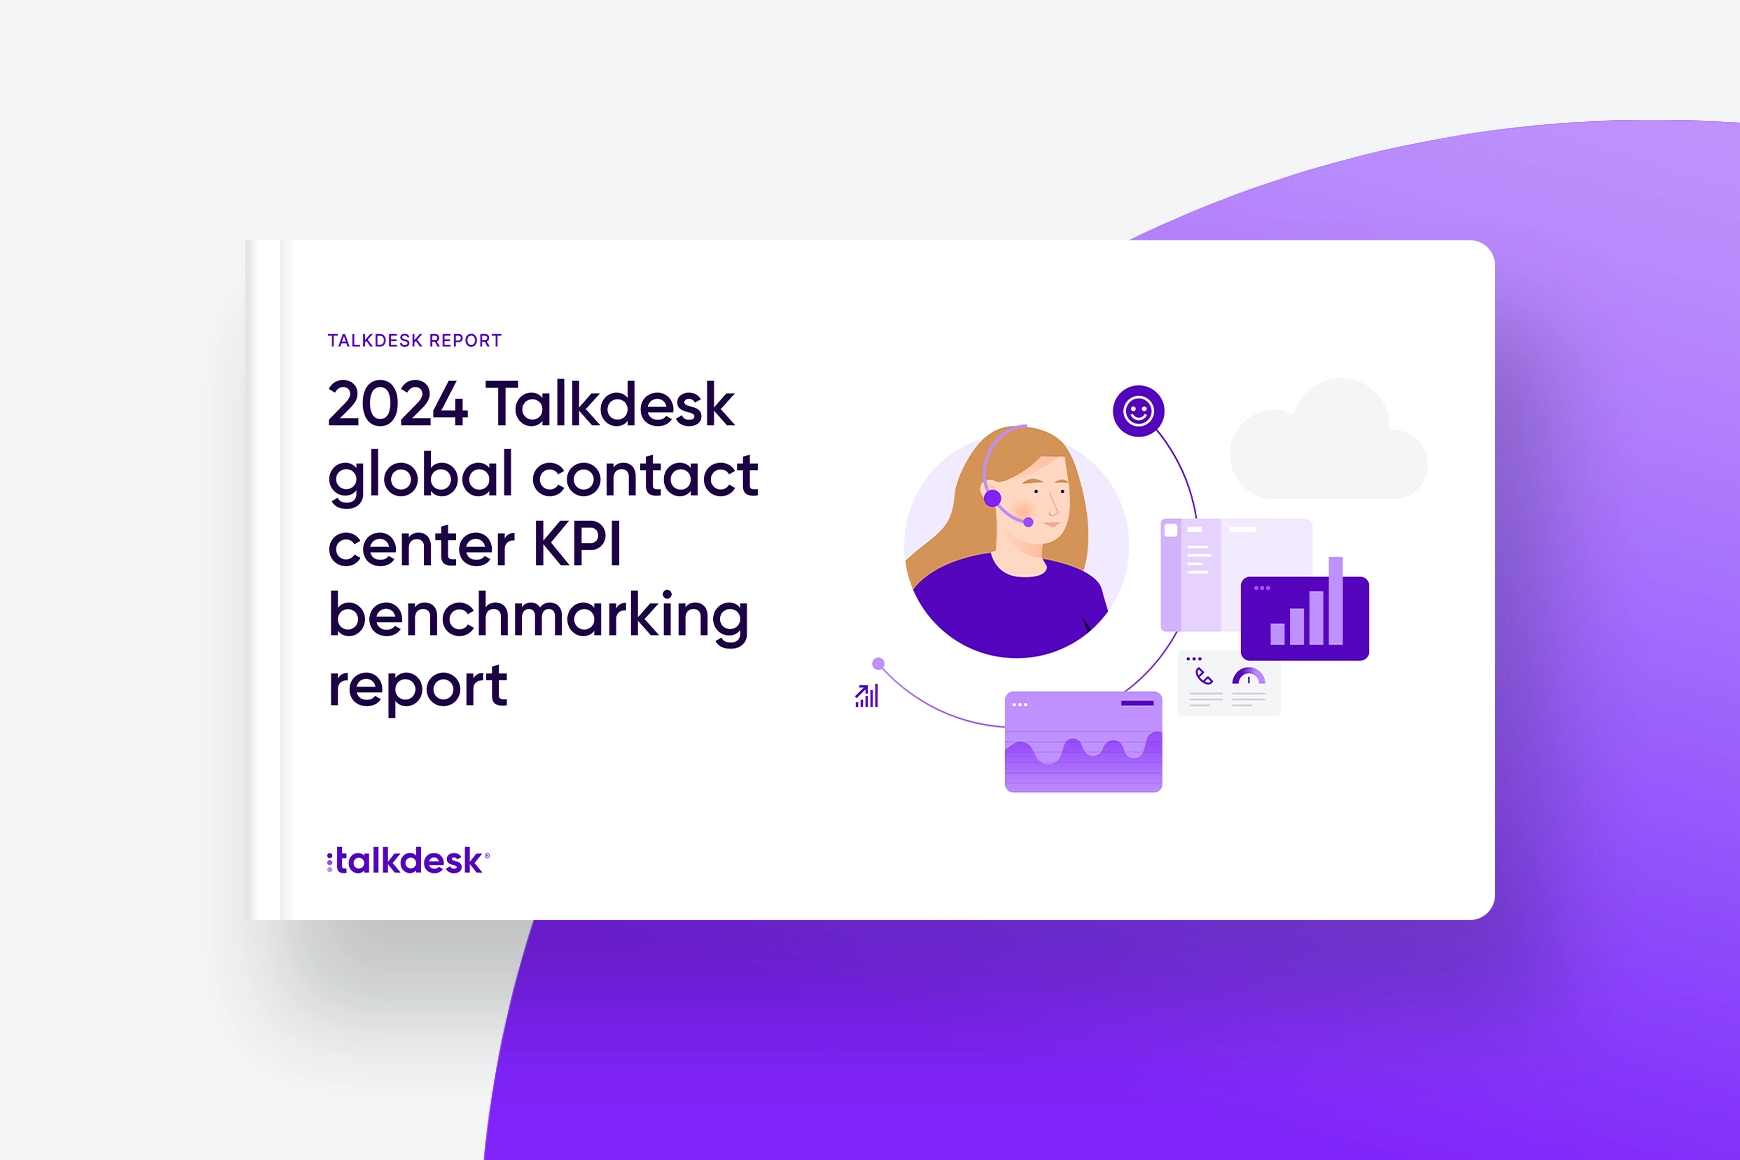 Talkdesk 2024 KPI benchmarking report for contact centers